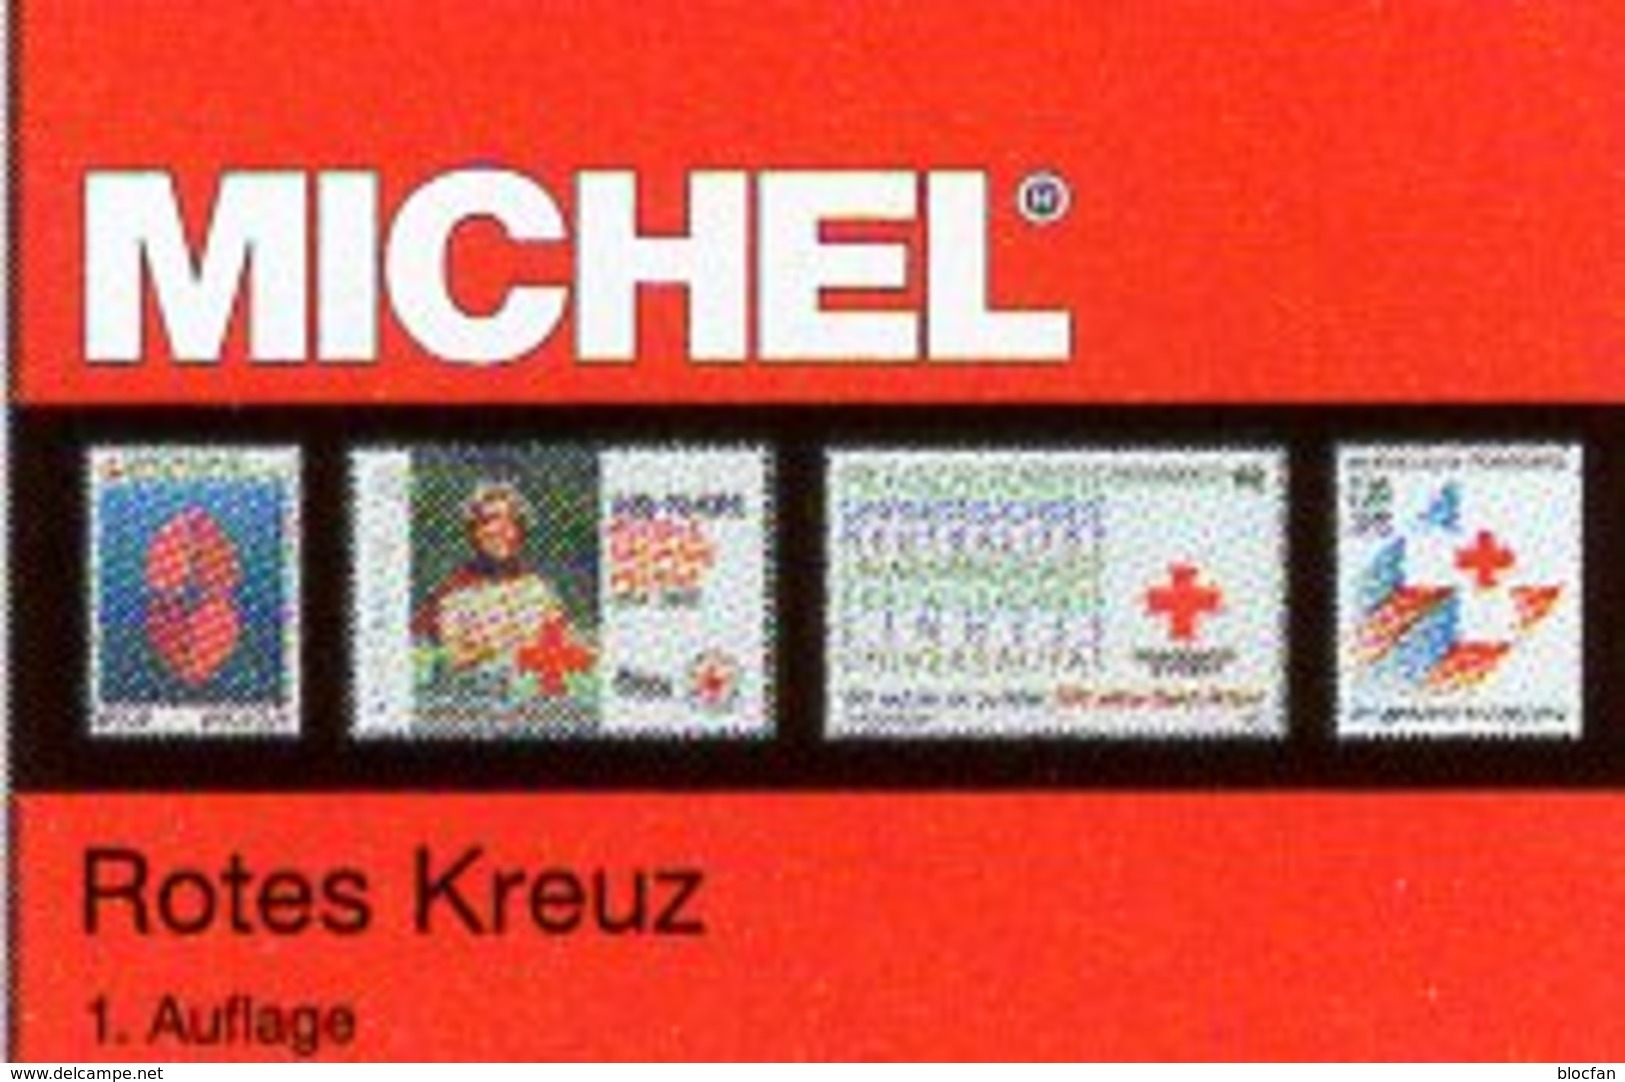 Rotes Kreuz 1.Auflage MICHEL Katalog 2019 new 70€ stamps catalogue red cross of all the world ISBN978-3-95402-255-7